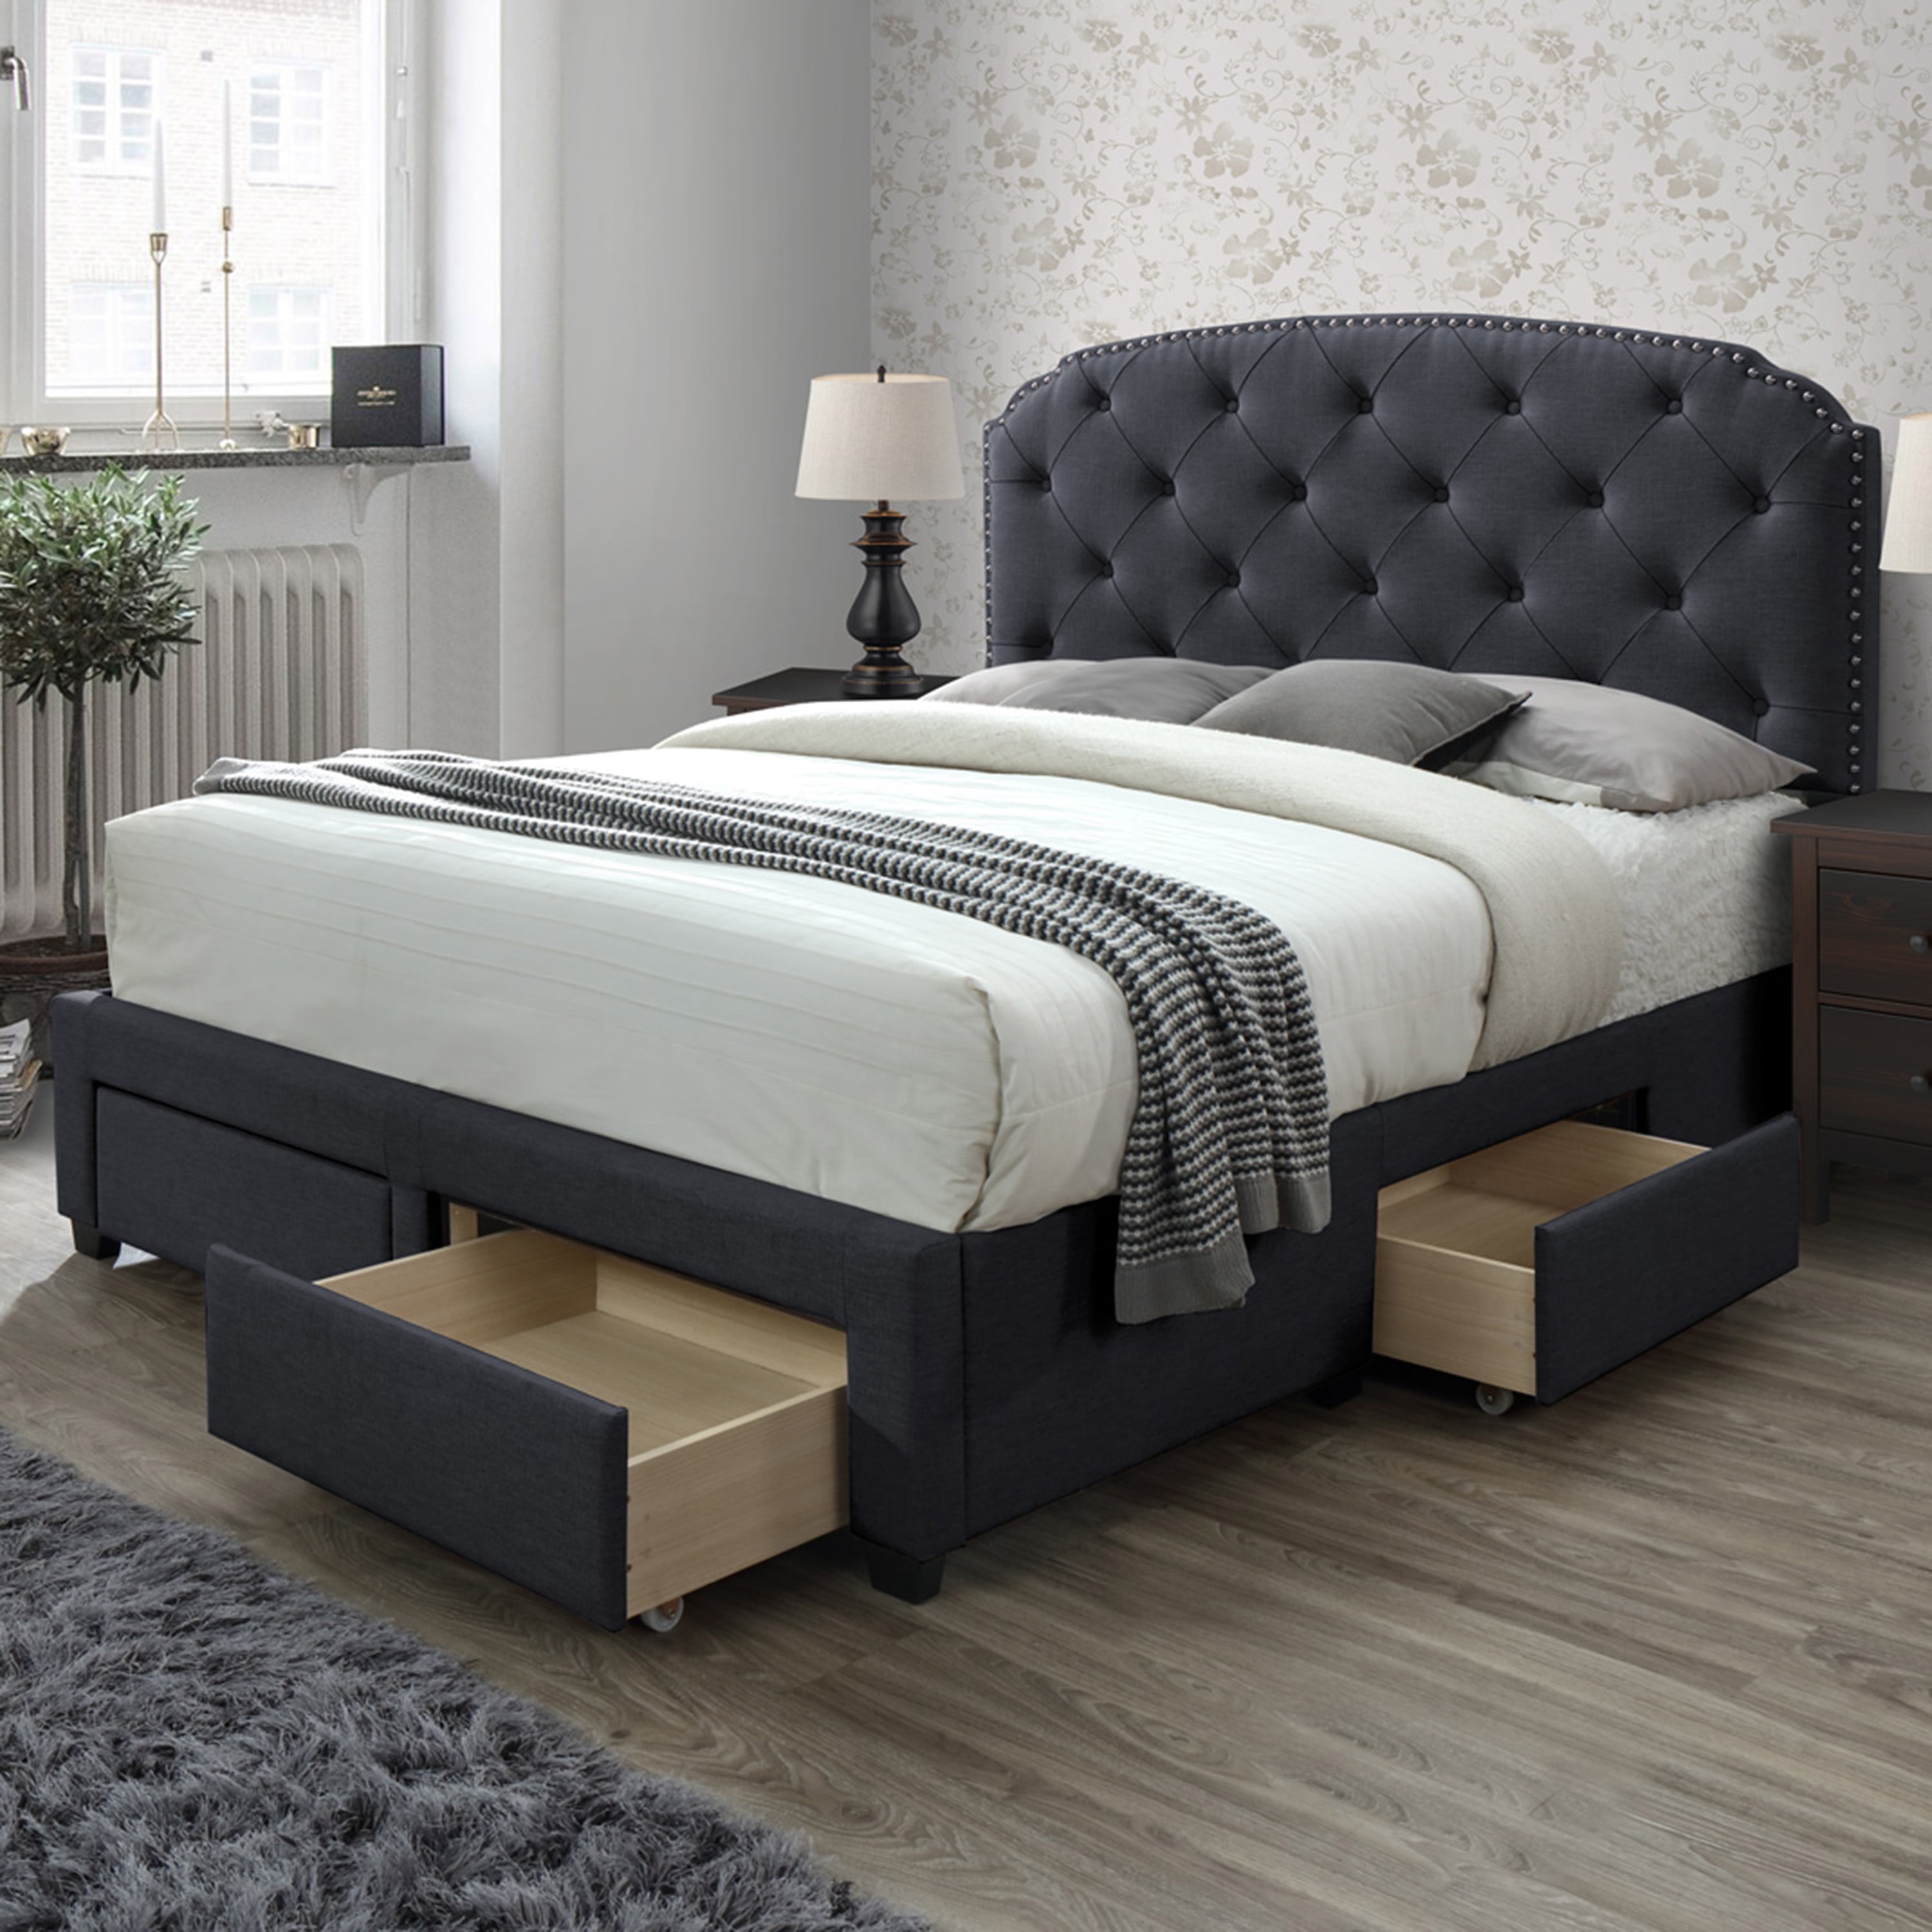 Dg Casa Argo Tufted Upholstered Panel, Double King Size Bed Frame With 4 Drawers Storage Led Headboard